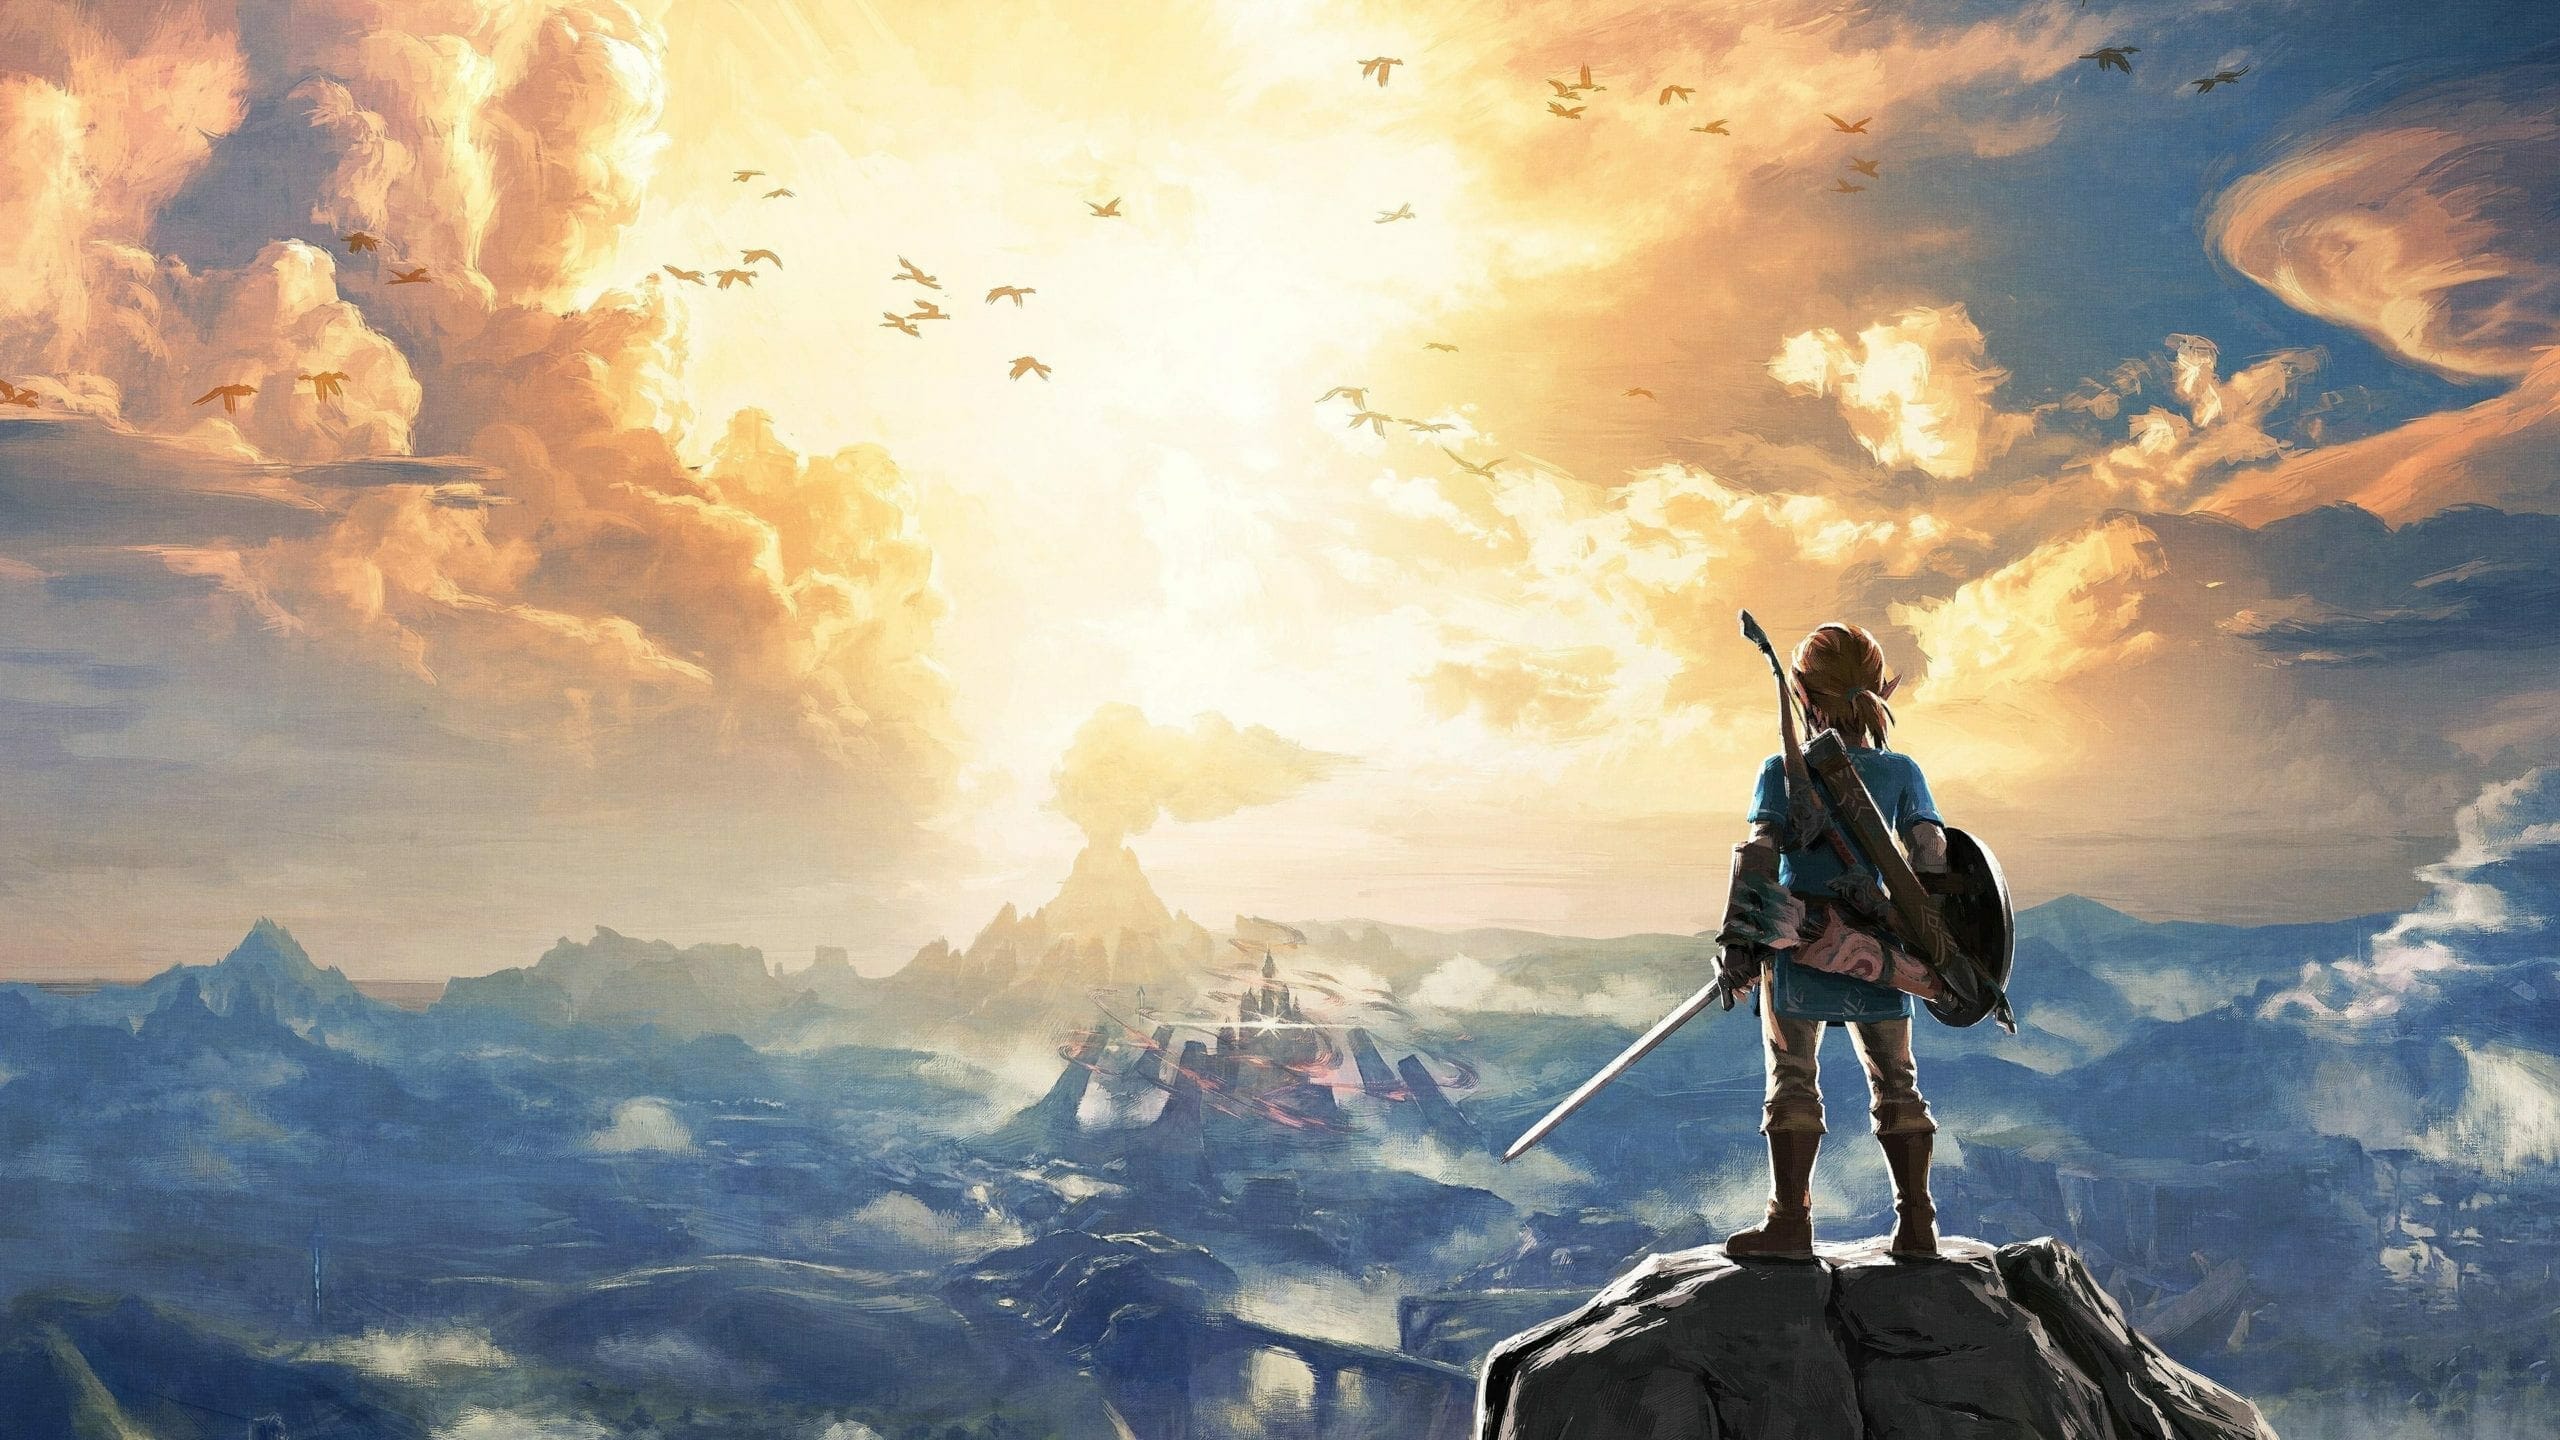 PCGames-Realm  Download Your Favorite PC Games for Free and Directly!: The  Legend of Zelda: Breath of the Wild [v1.5.0 + Cemu v1.11.4B + All DLCs] for  PC [9.2 GB] Repack